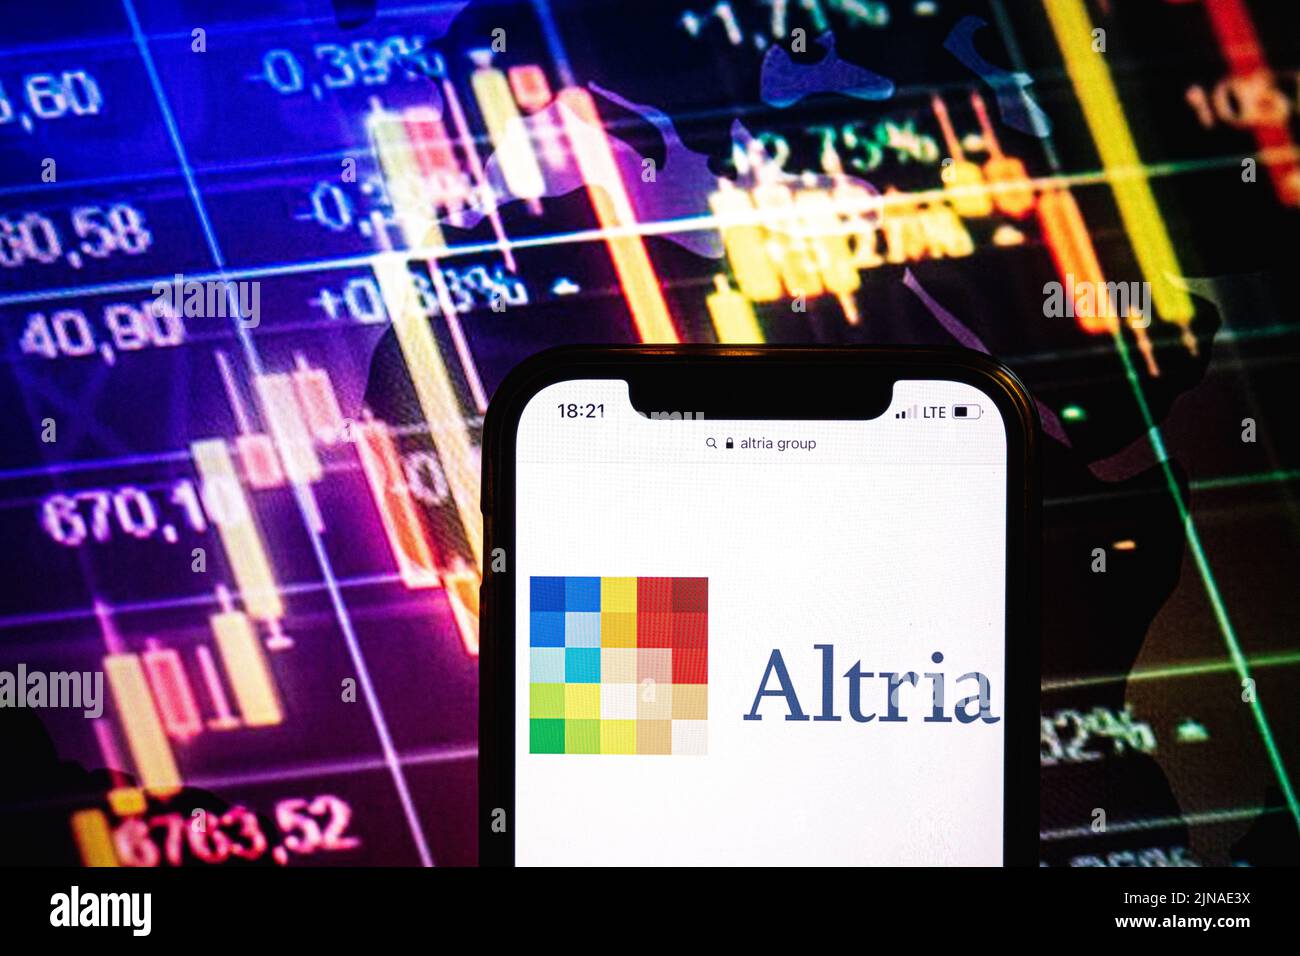 KONSKIE, POLAND - August 09, 2022: Smartphone displaying logo of Altria Group company on stock exchange diagram background Stock Photo